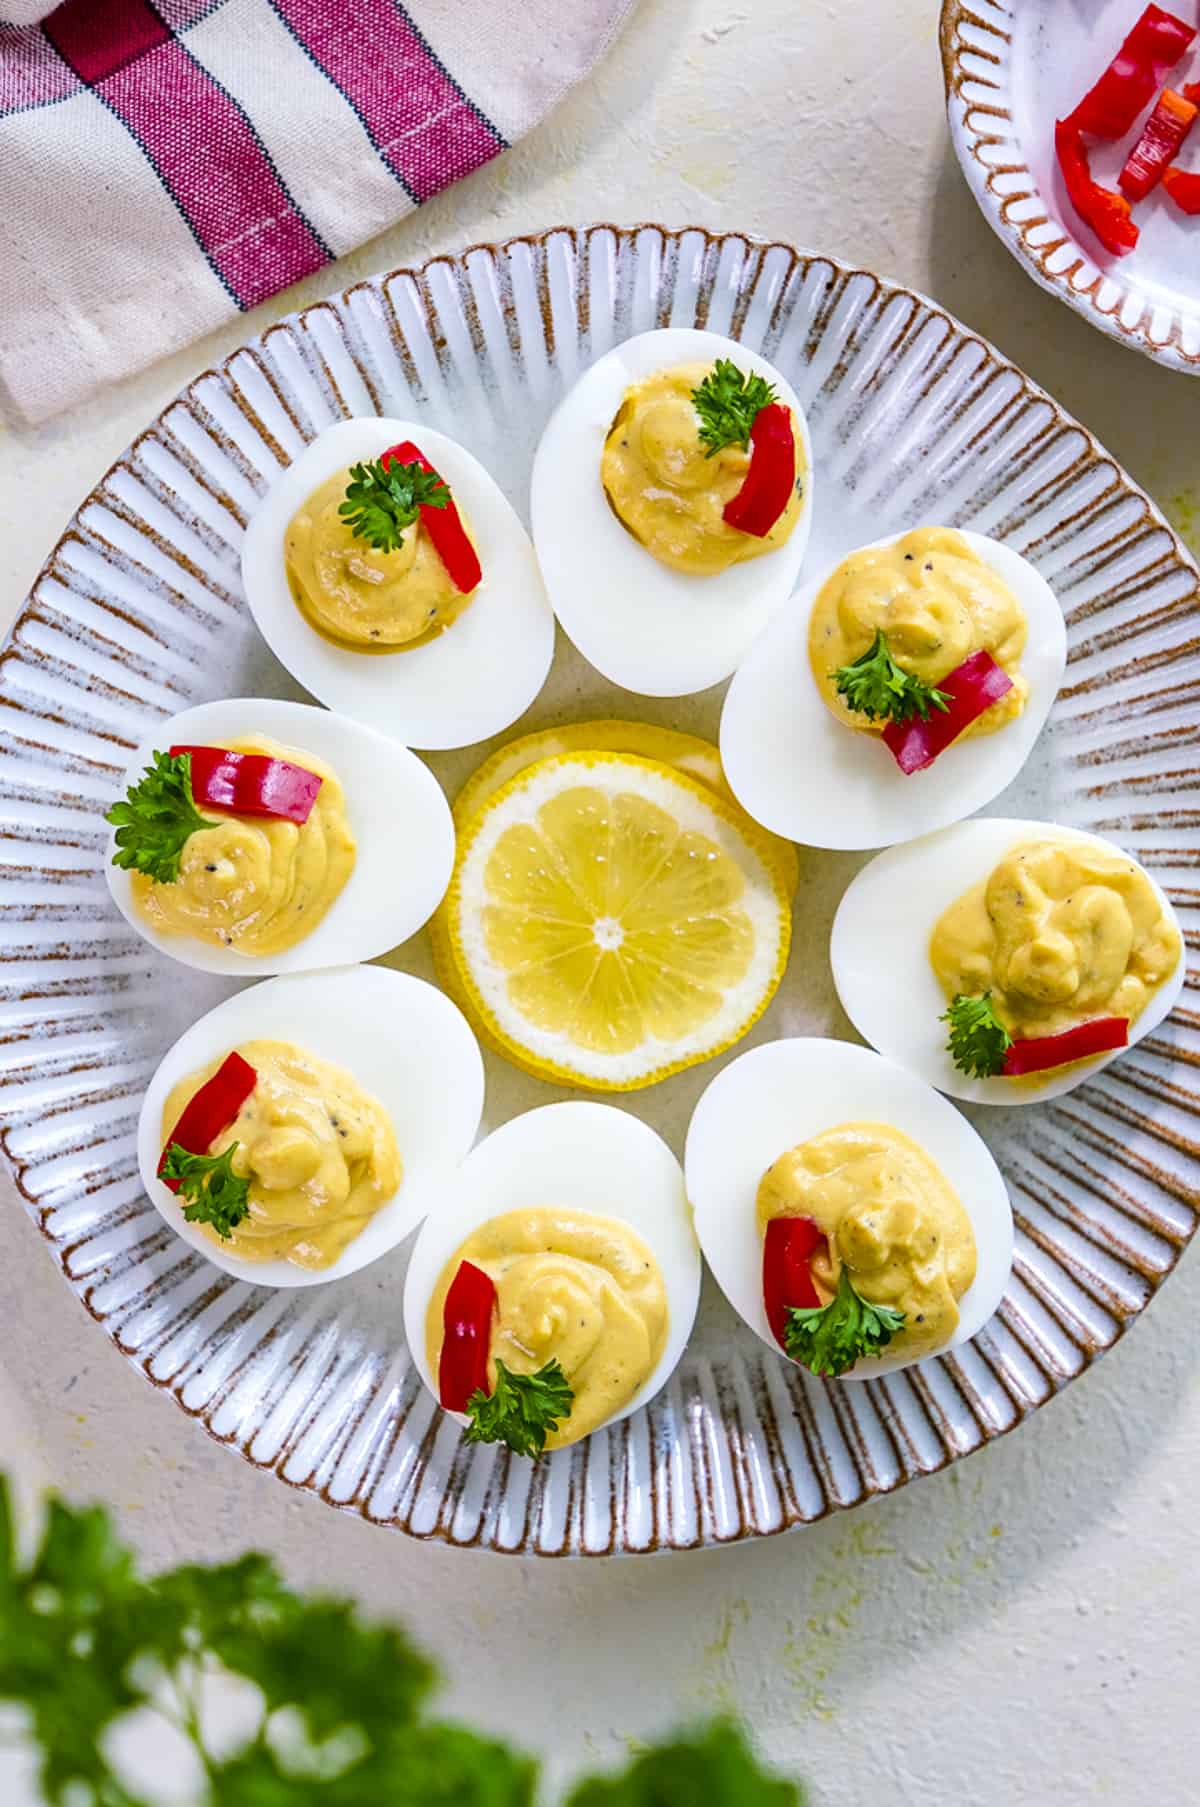 Deviled eggs served on a white plate.